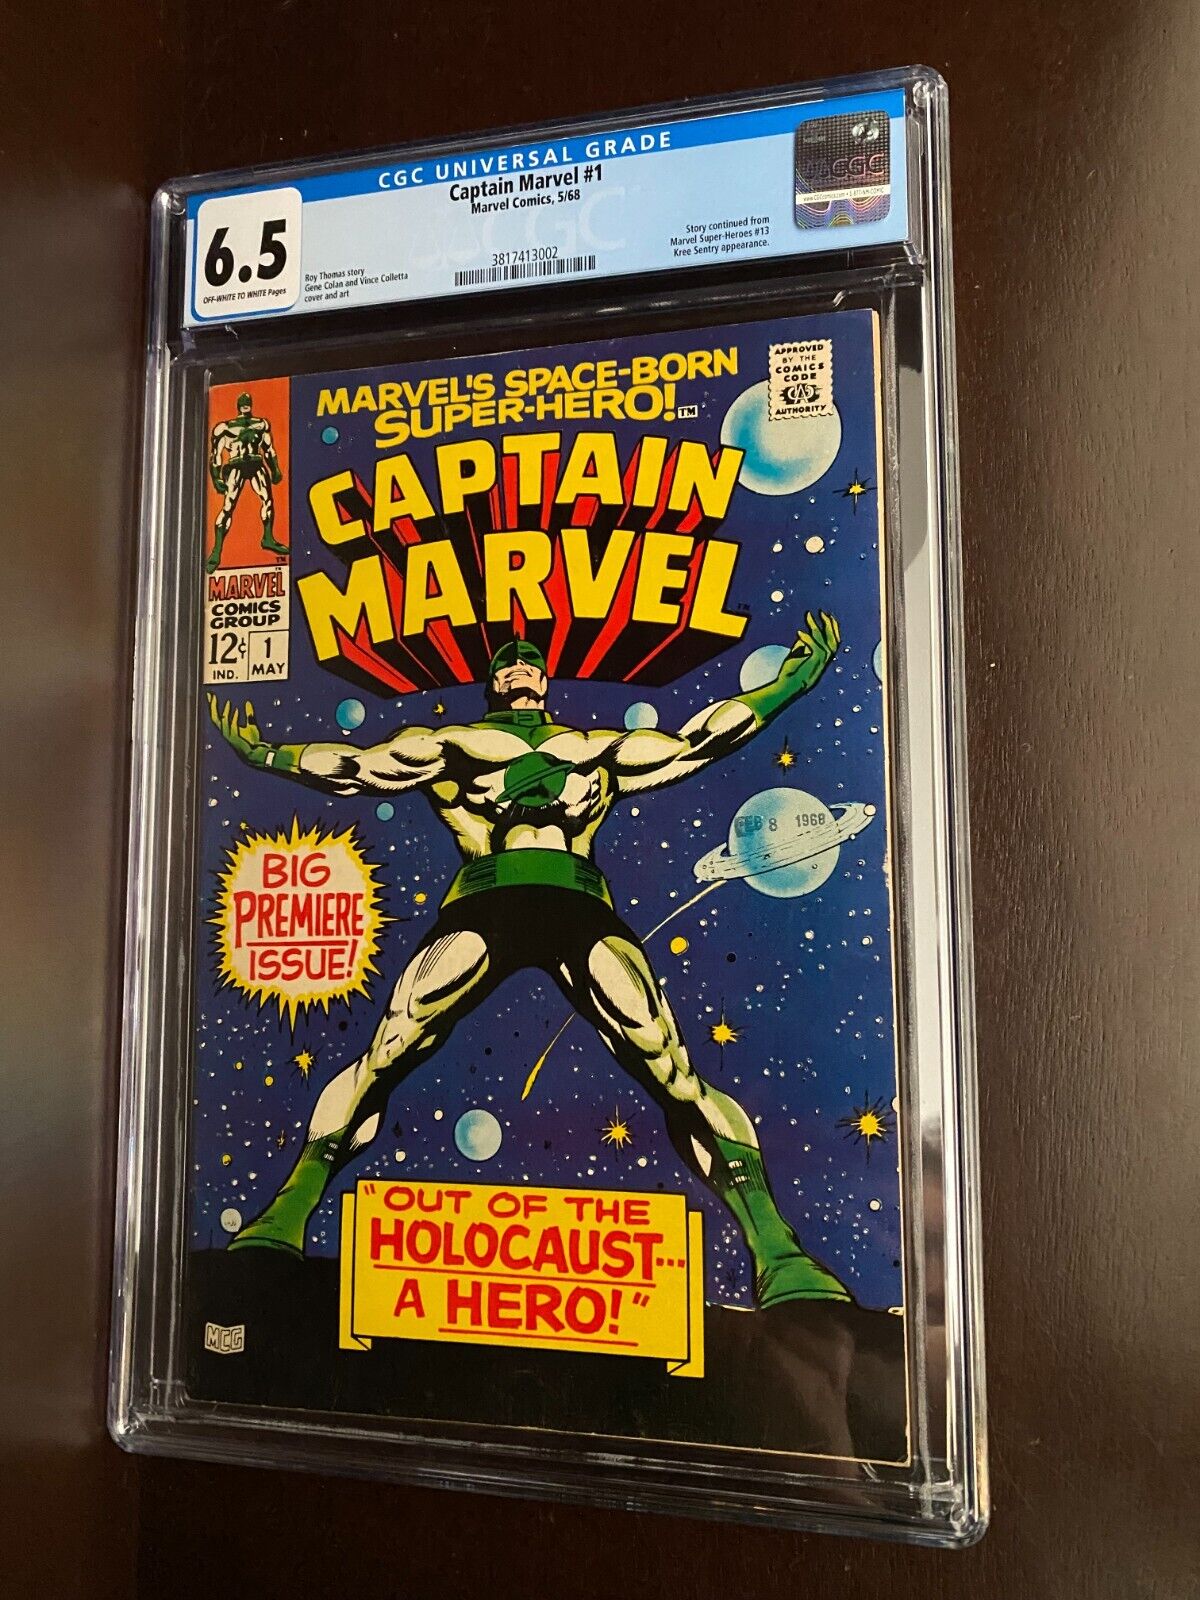 Captain Marvel #1 (1968) / CGC 6.5 / Key 1st issue / Classic cover / Silver Age